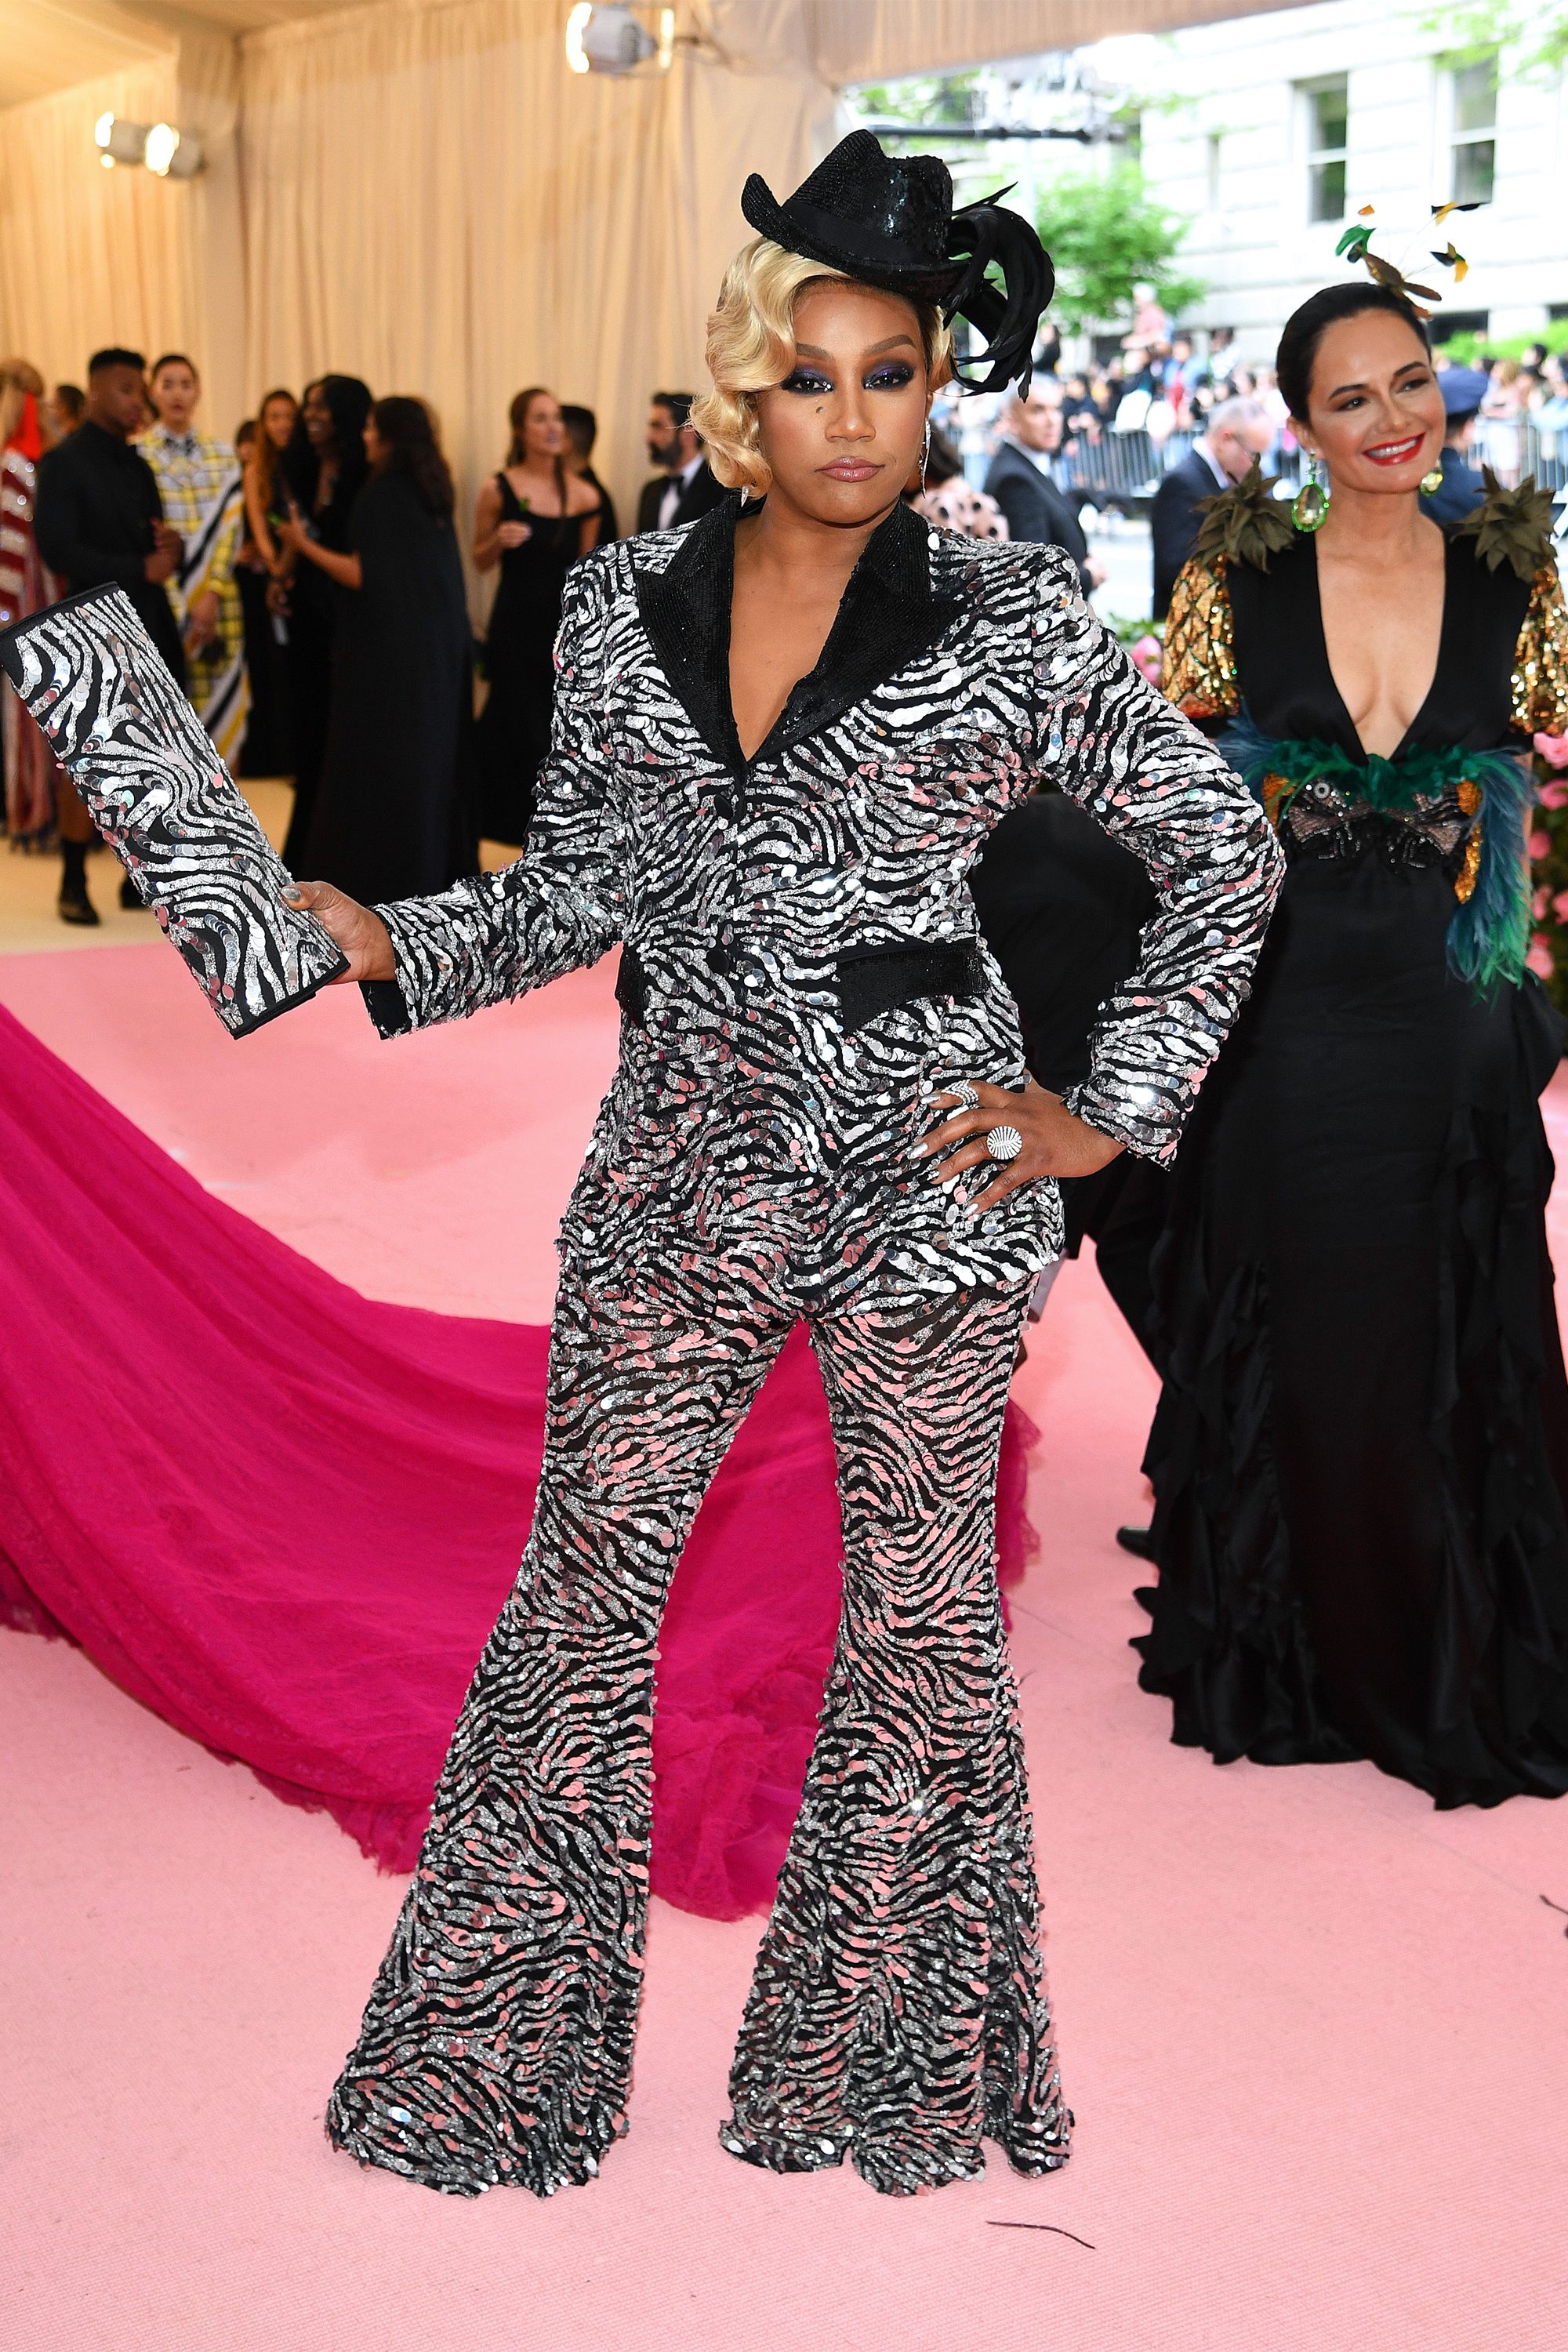 crazy met gala outfits 2019